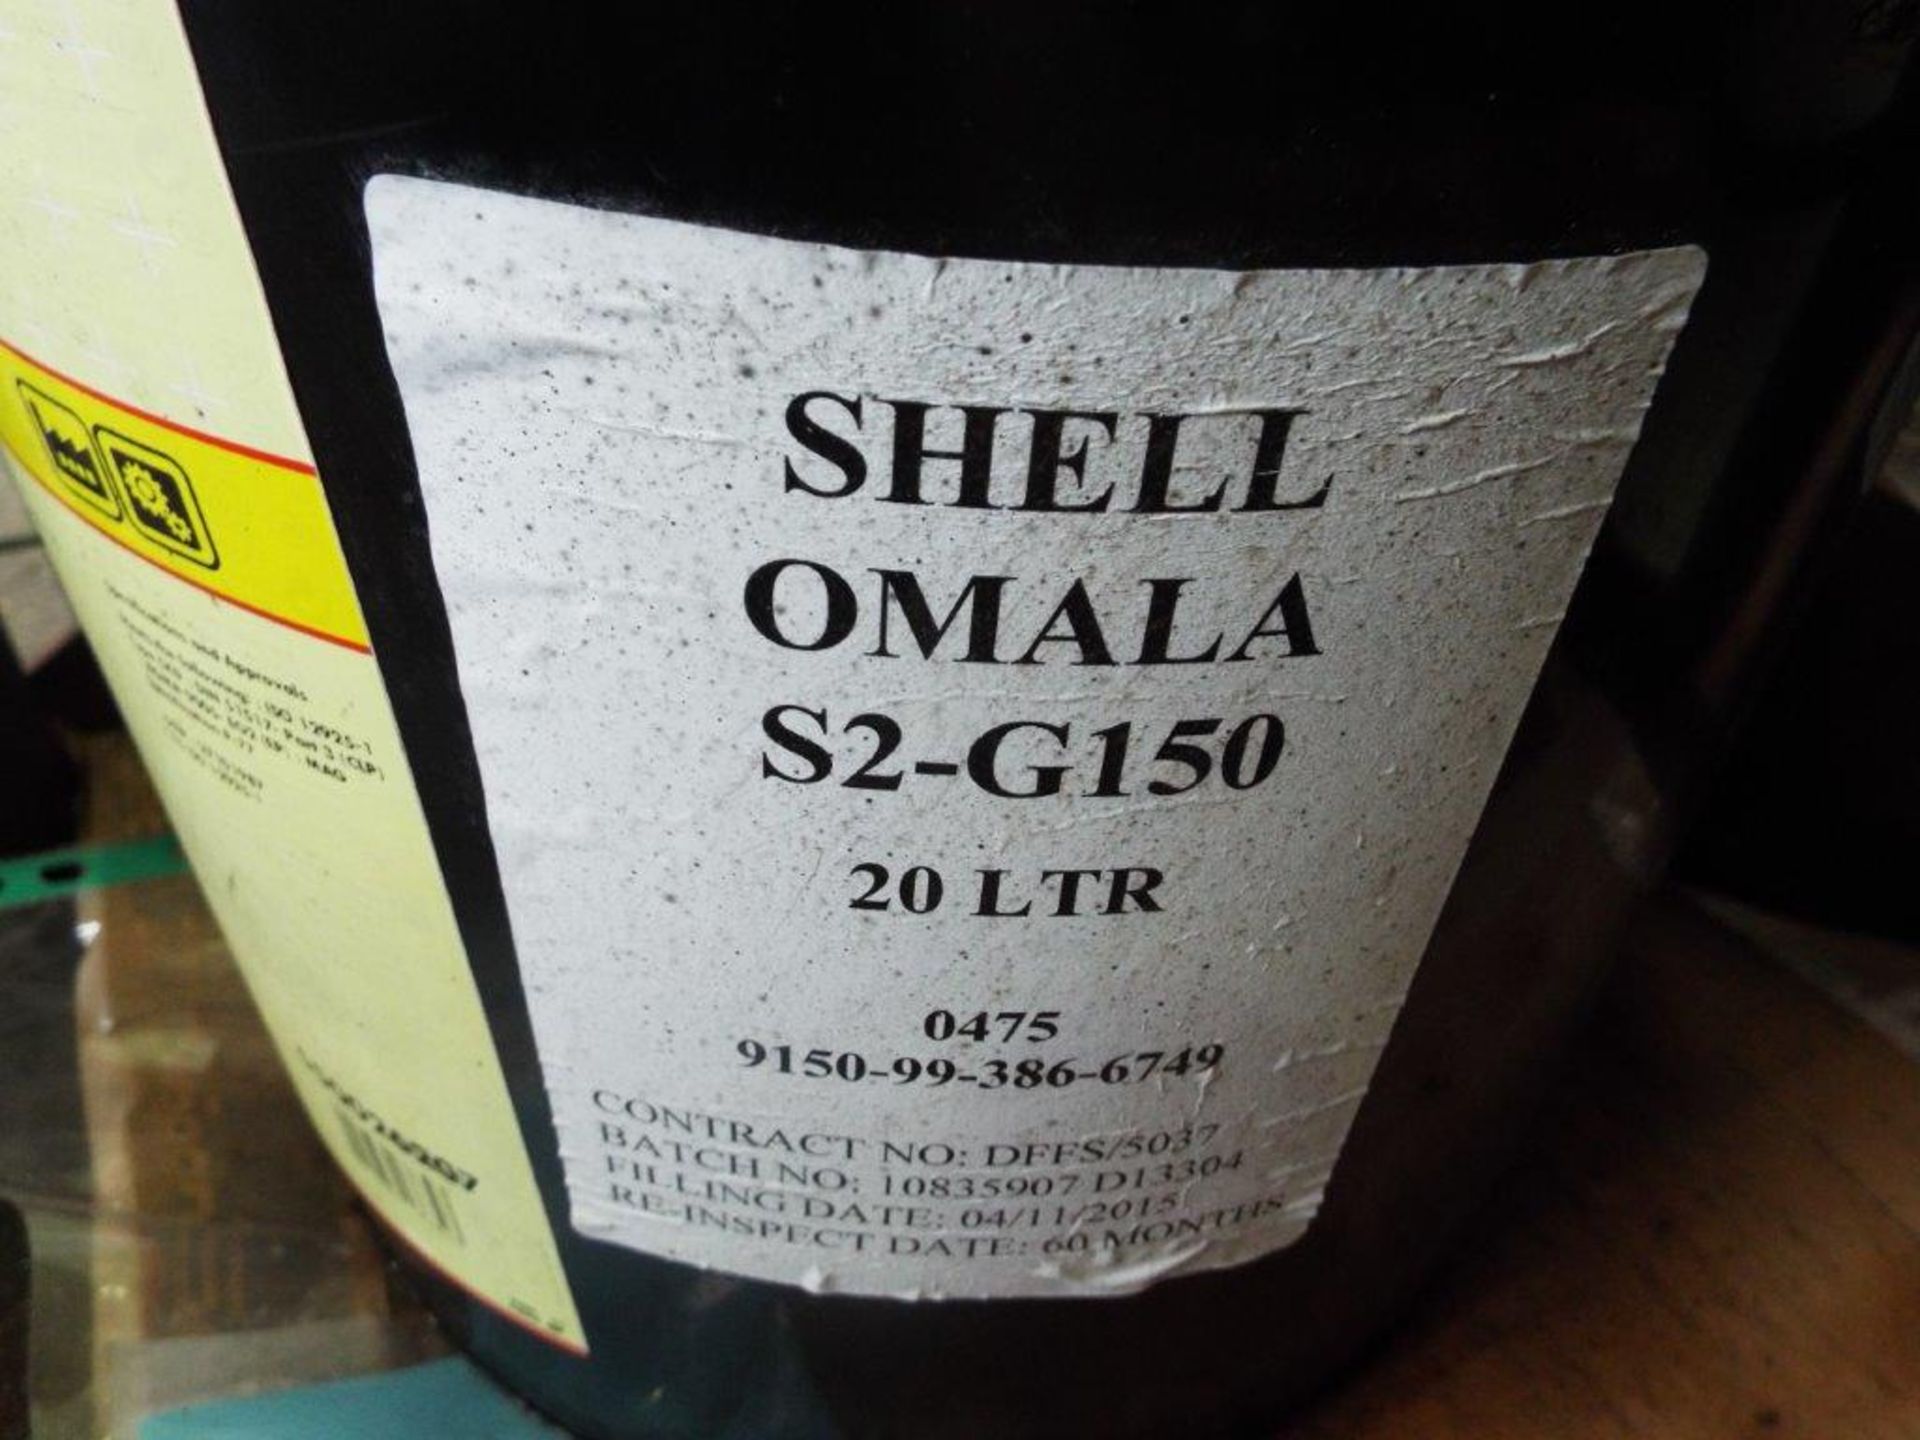 5 x Unissued 20L Drums of Shell Omala S2G 150 Industrial Gear and Bearing Oil - Image 3 of 4